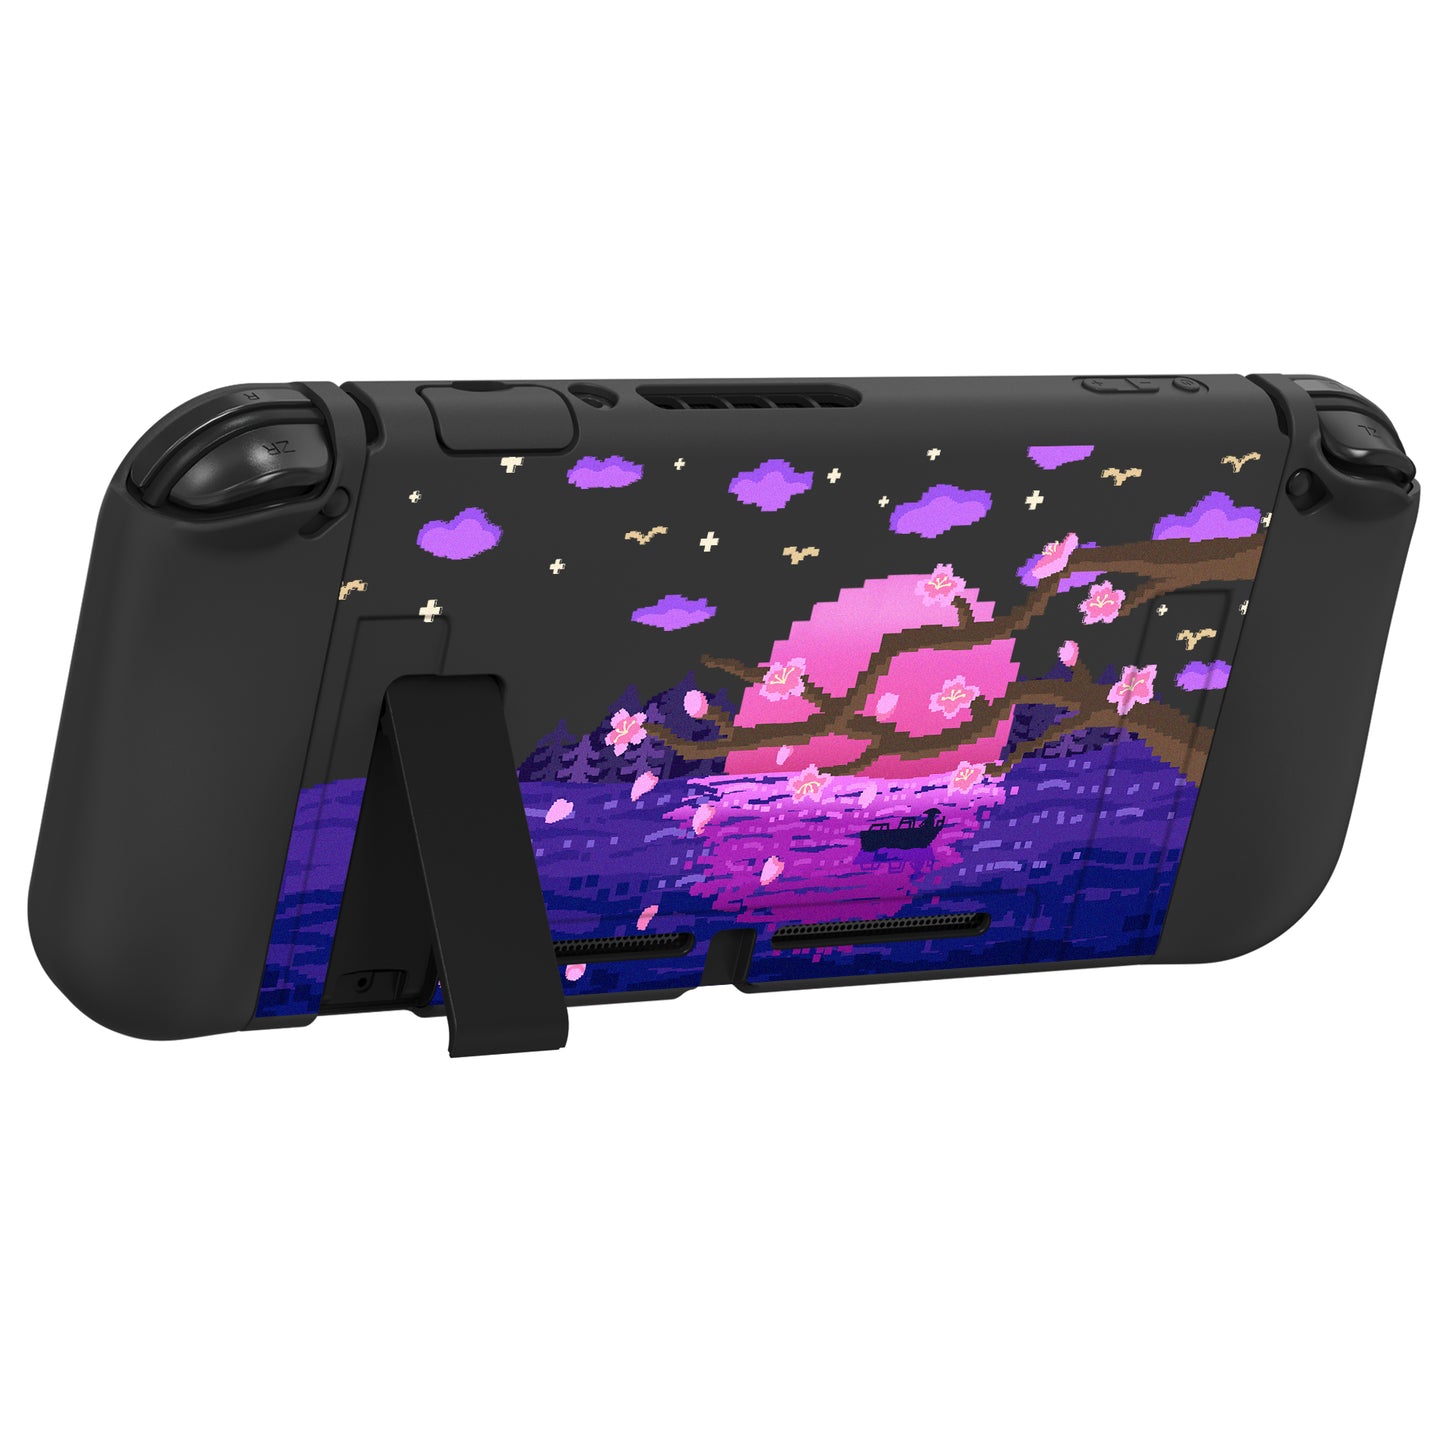 PlayVital ZealProtect Soft Protective Case for Nintendo Switch, Flexible Cover for Switch with Tempered Glass Screen Protector & Thumb Grips & ABXY Direction Button Caps - Pixel Moon Night - RNSYV6023 playvital